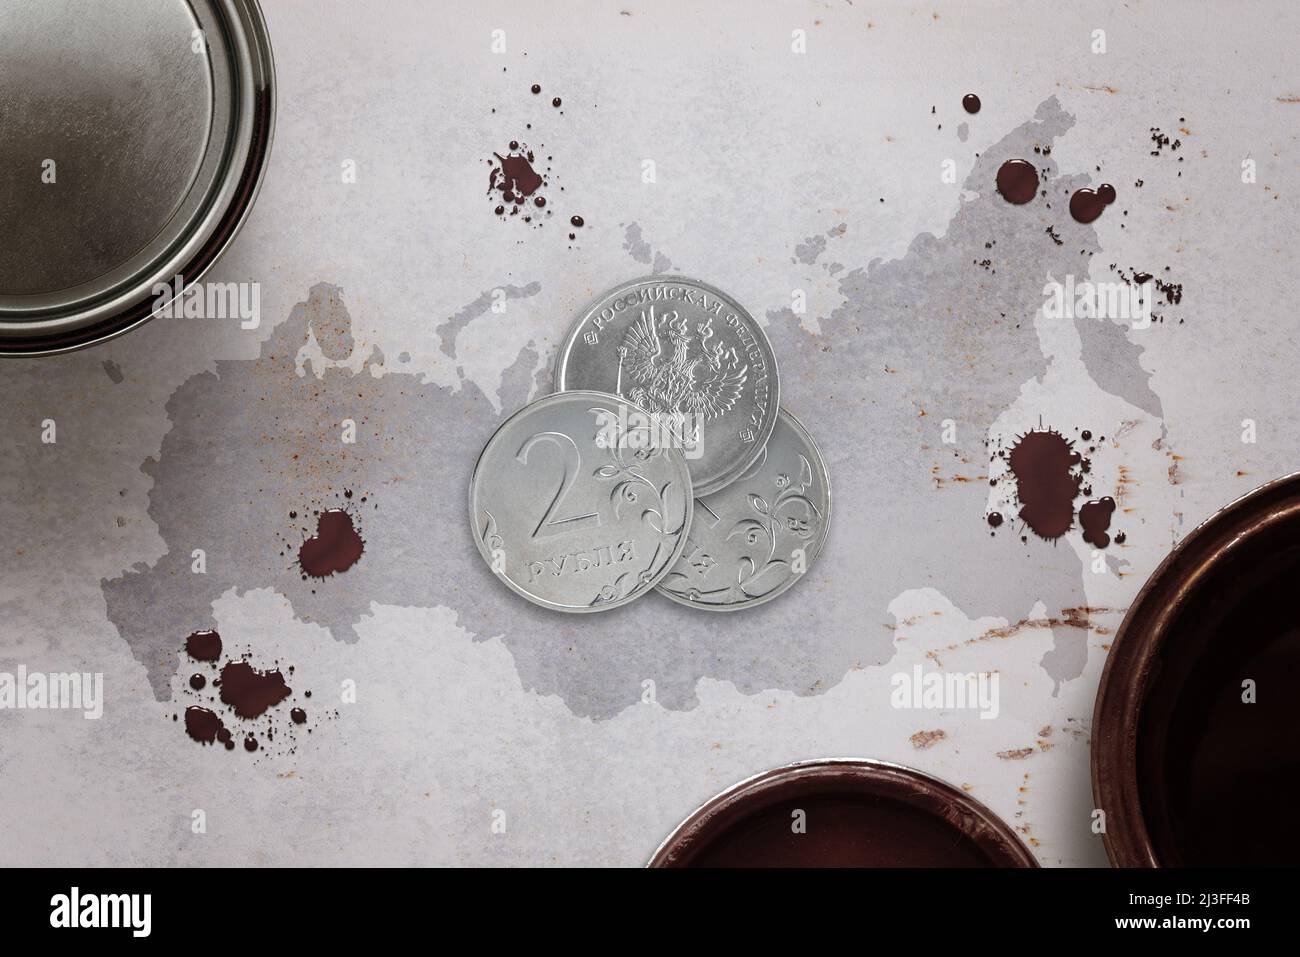 Russian ruble coins surrounded by buckets of oil on the map of Russia. Strengthening the Russian ruble and increasing energy exports is a concept Stock Photo